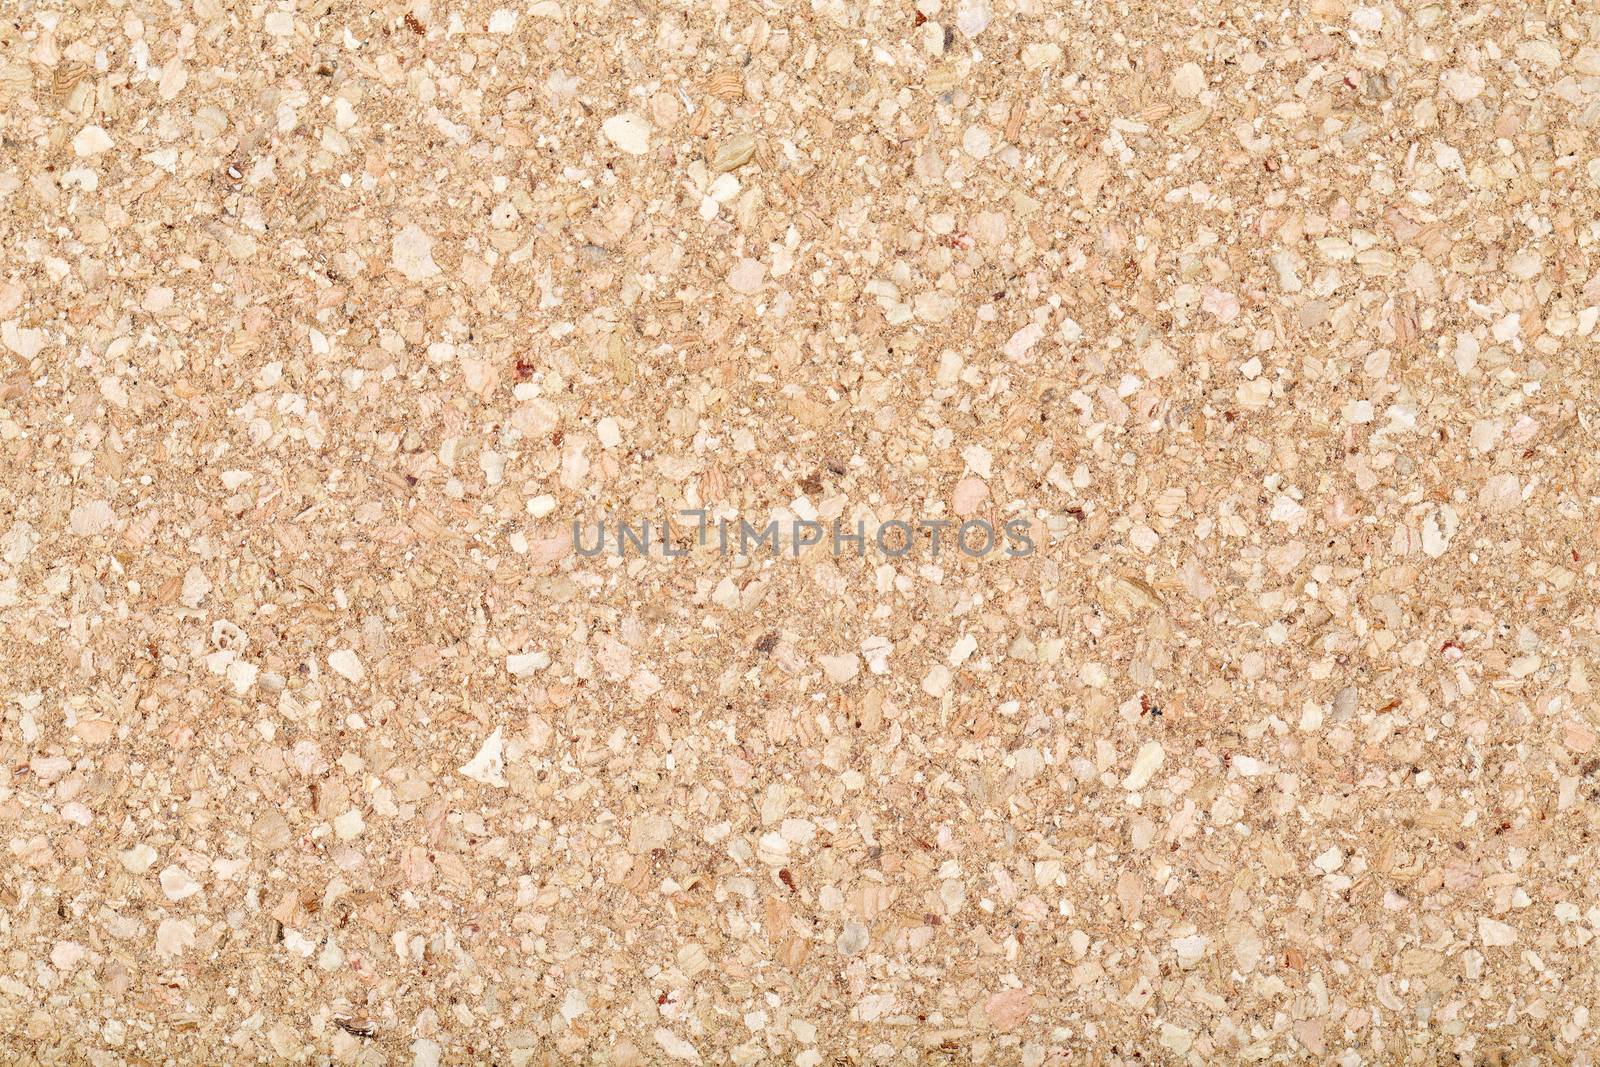 Brown cork bulletin board texture background, for text copyspace ad for education or business advertisement concept.